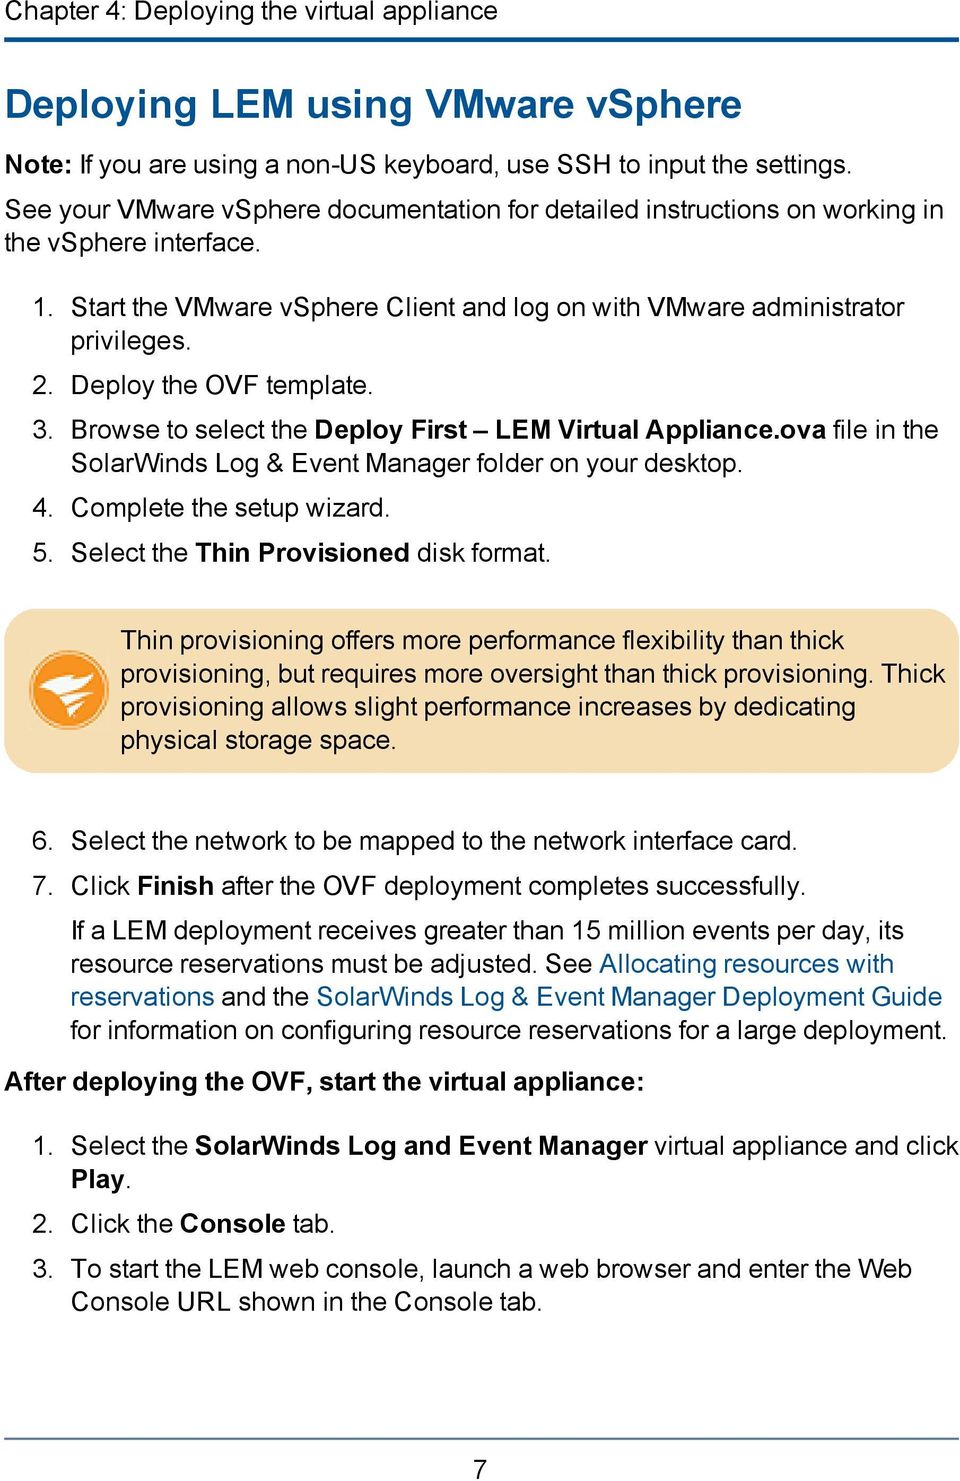 Deploy the OVF template. 3. Browse to select the Deploy First LEM Virtual Appliance.ova file in the SolarWinds Log & Event Manager folder on your desktop. 4. Complete the setup wizard. 5.